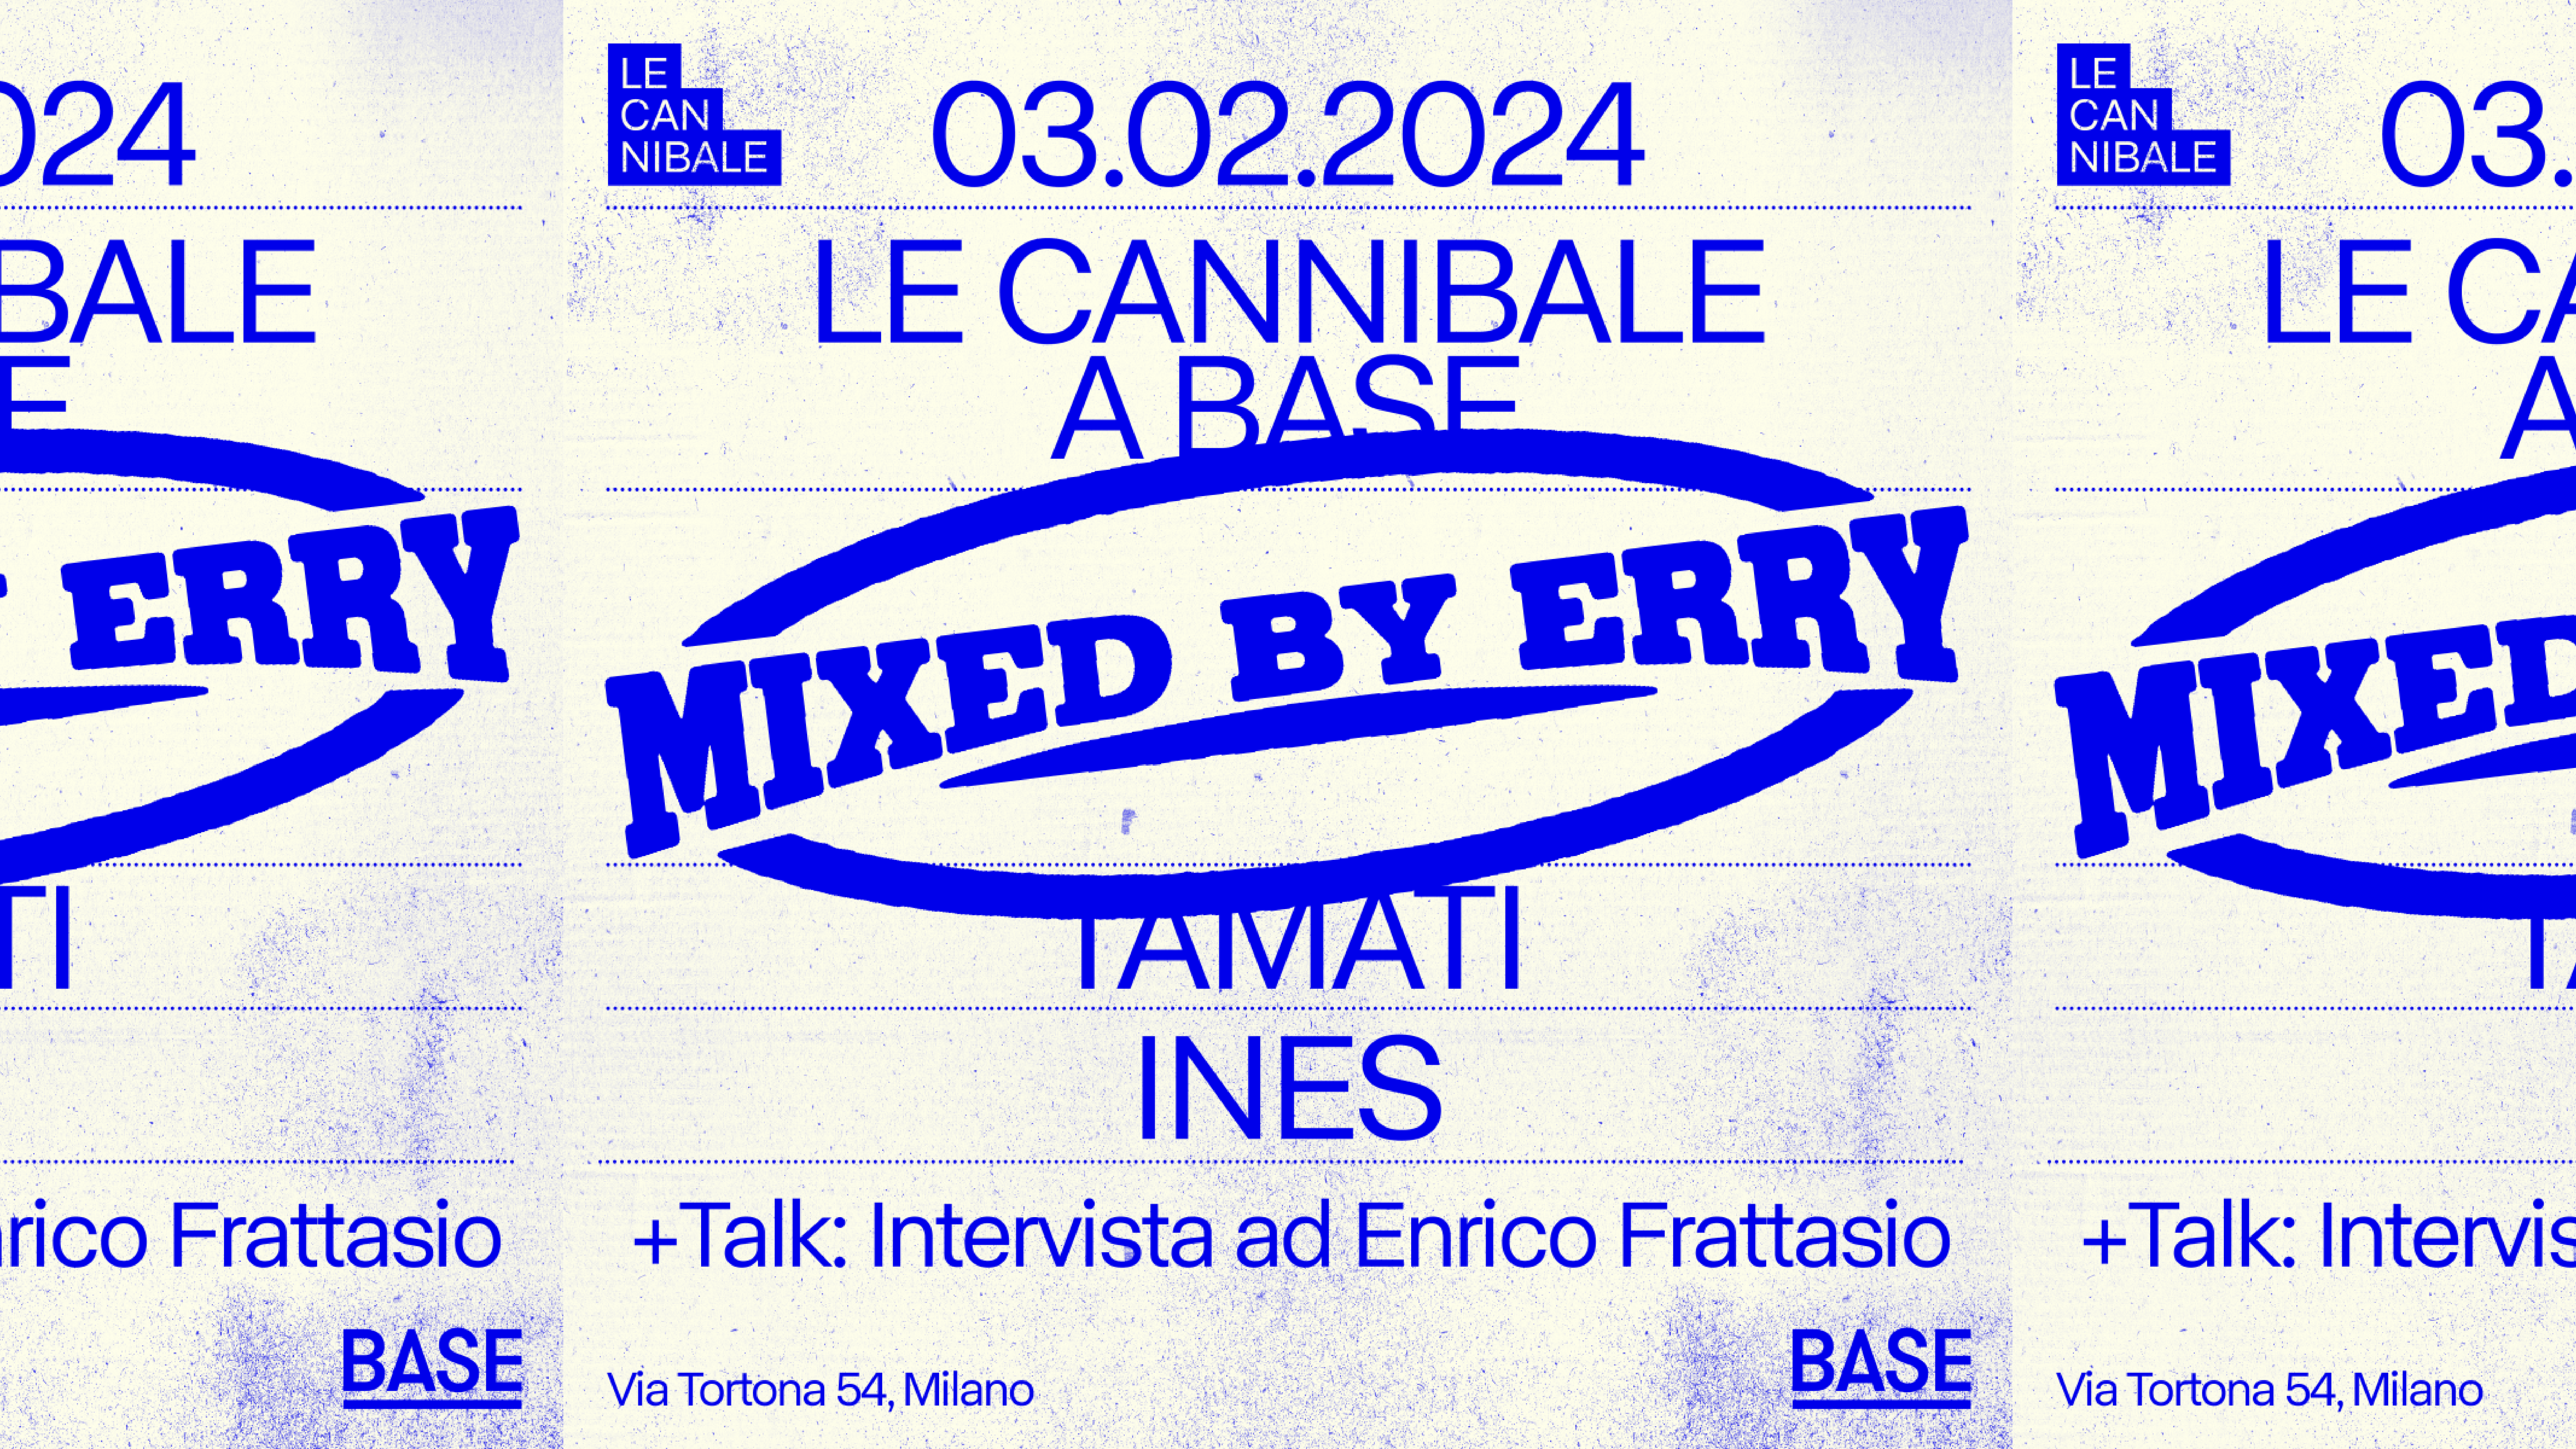 Le Cannibale - Mixed by Erry, Ines, Tamati - フライヤー表